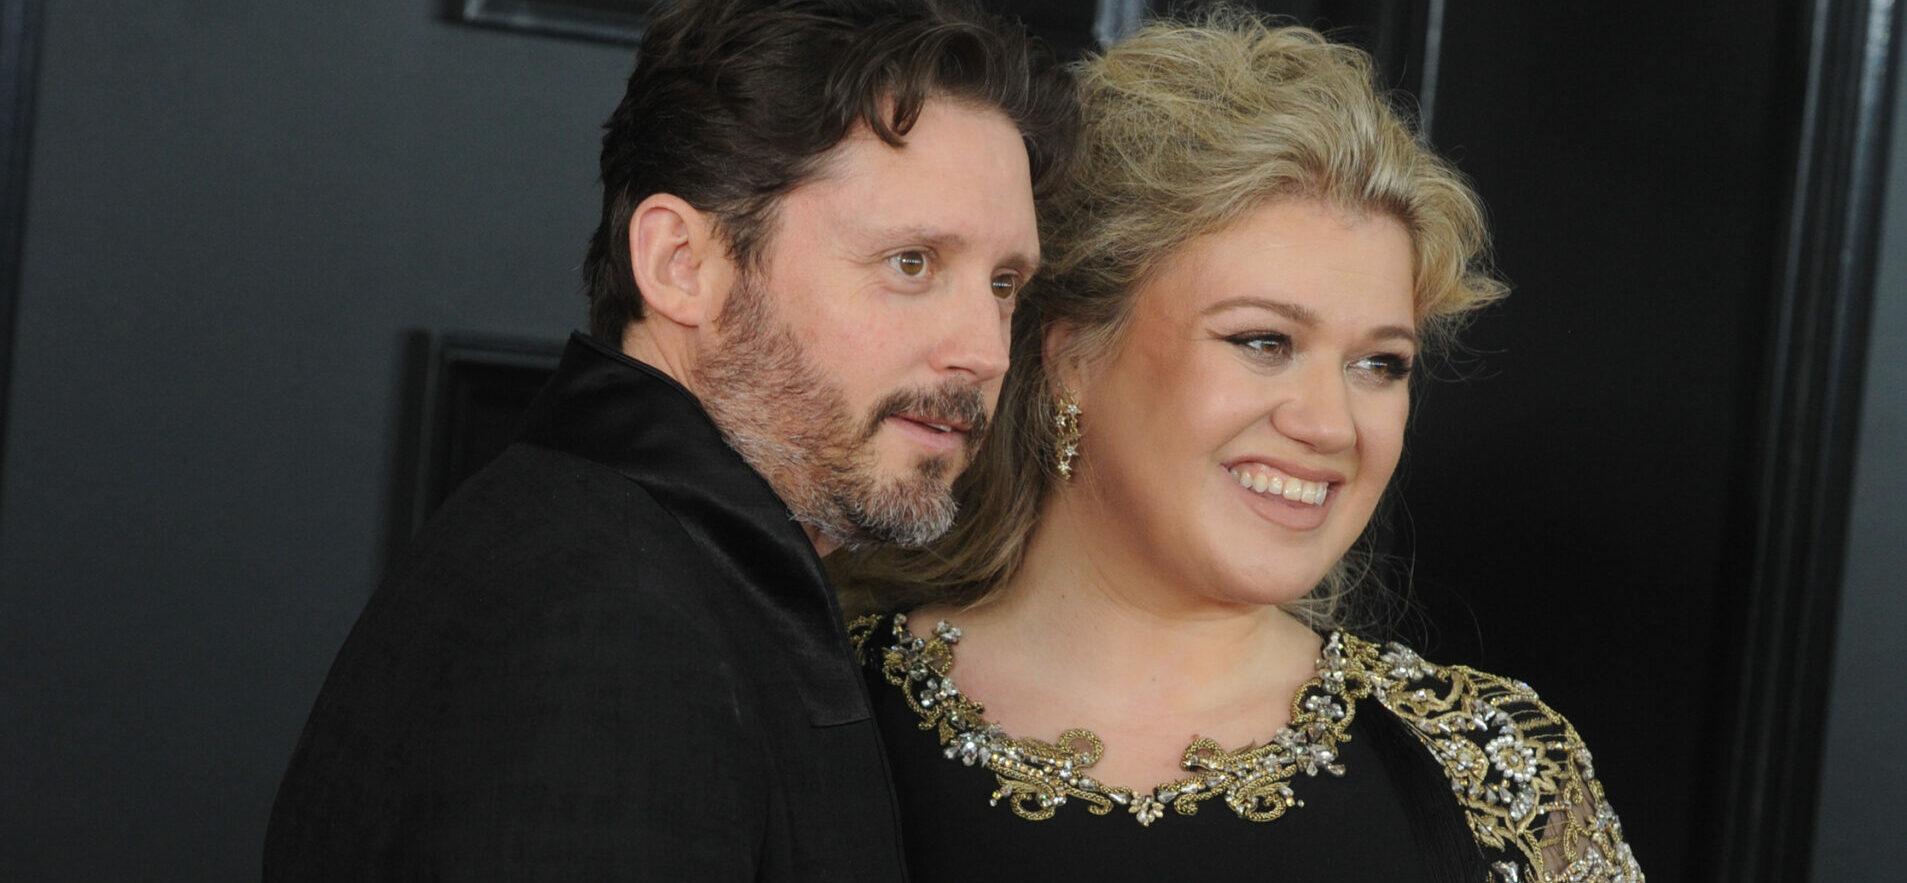 Kelly Clarkson Ordered To Pay Ex-Husband $200,000 A Month In Support